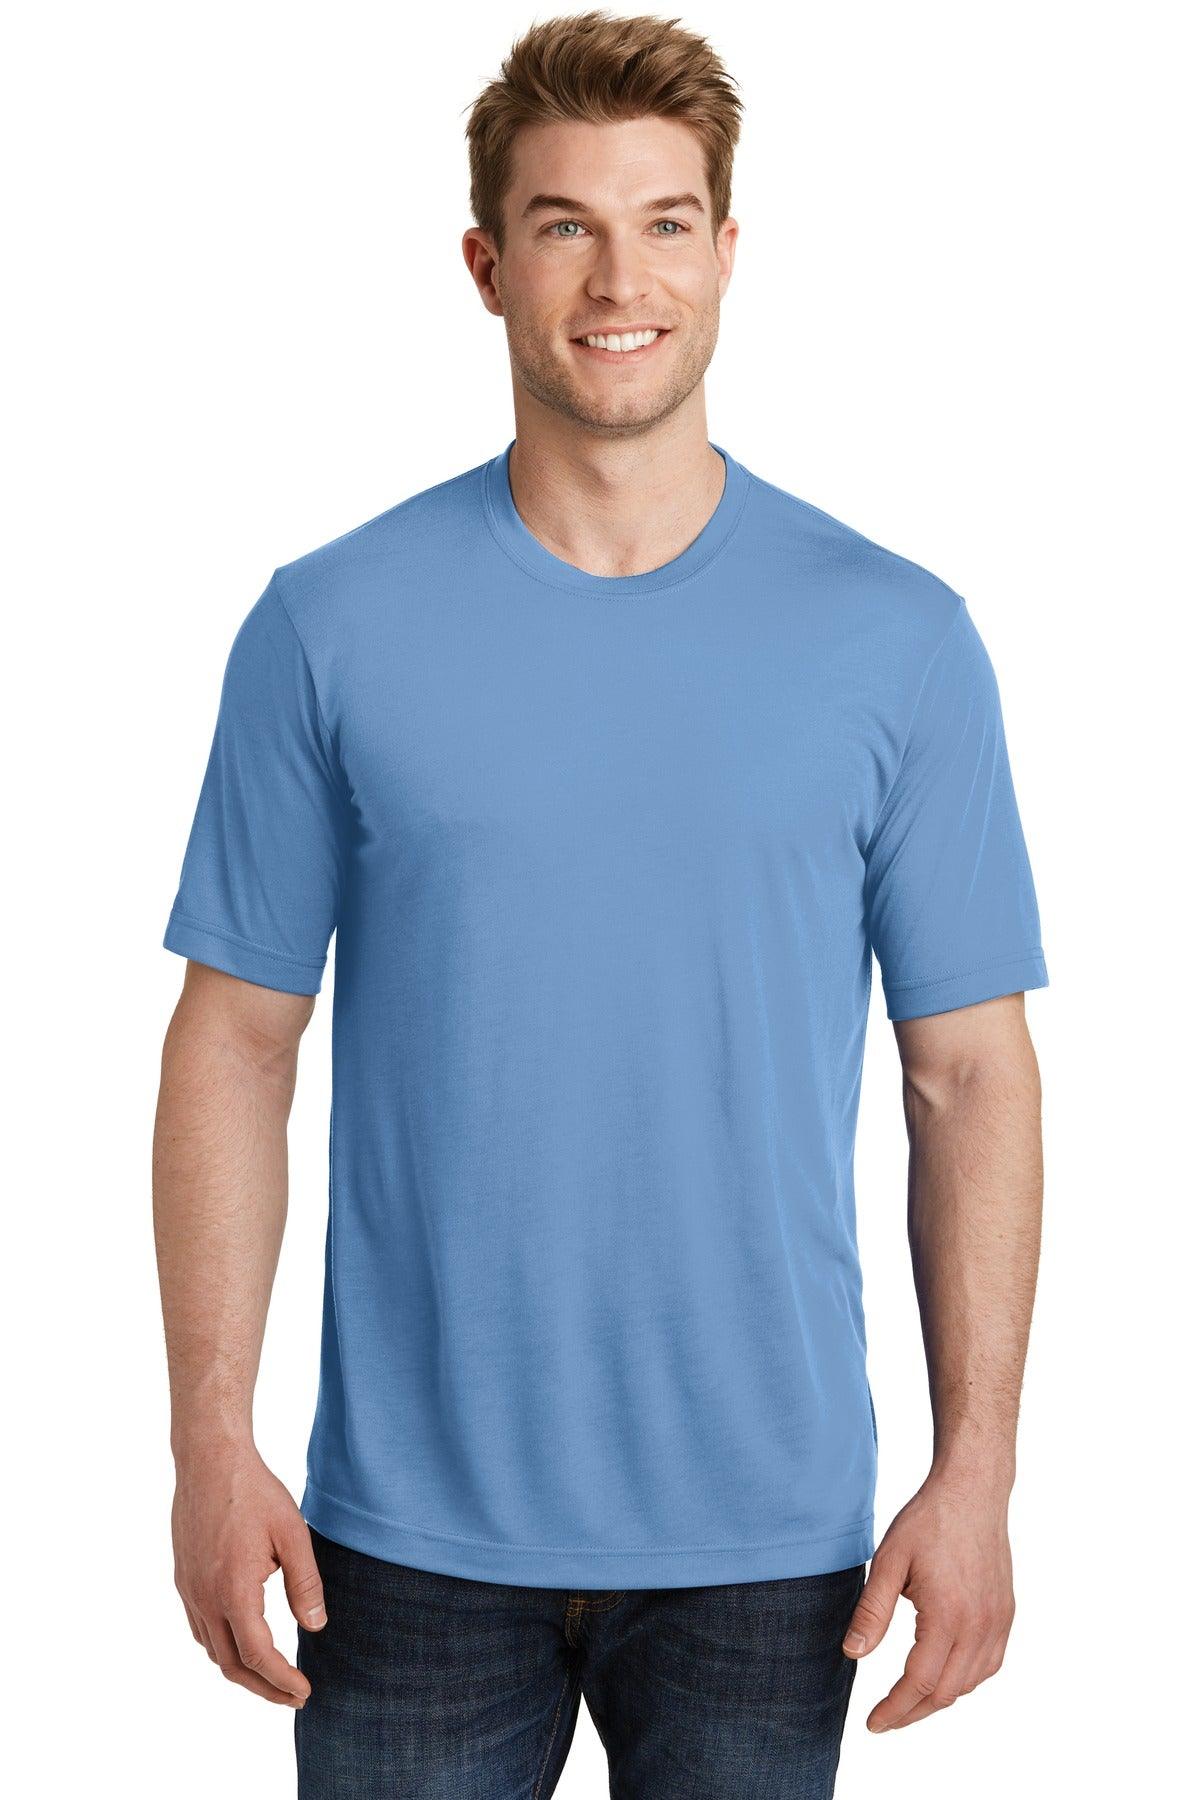 Sport-Tek PosiCharge Competitor Cotton Touch Tee. ST450 - Dresses Max